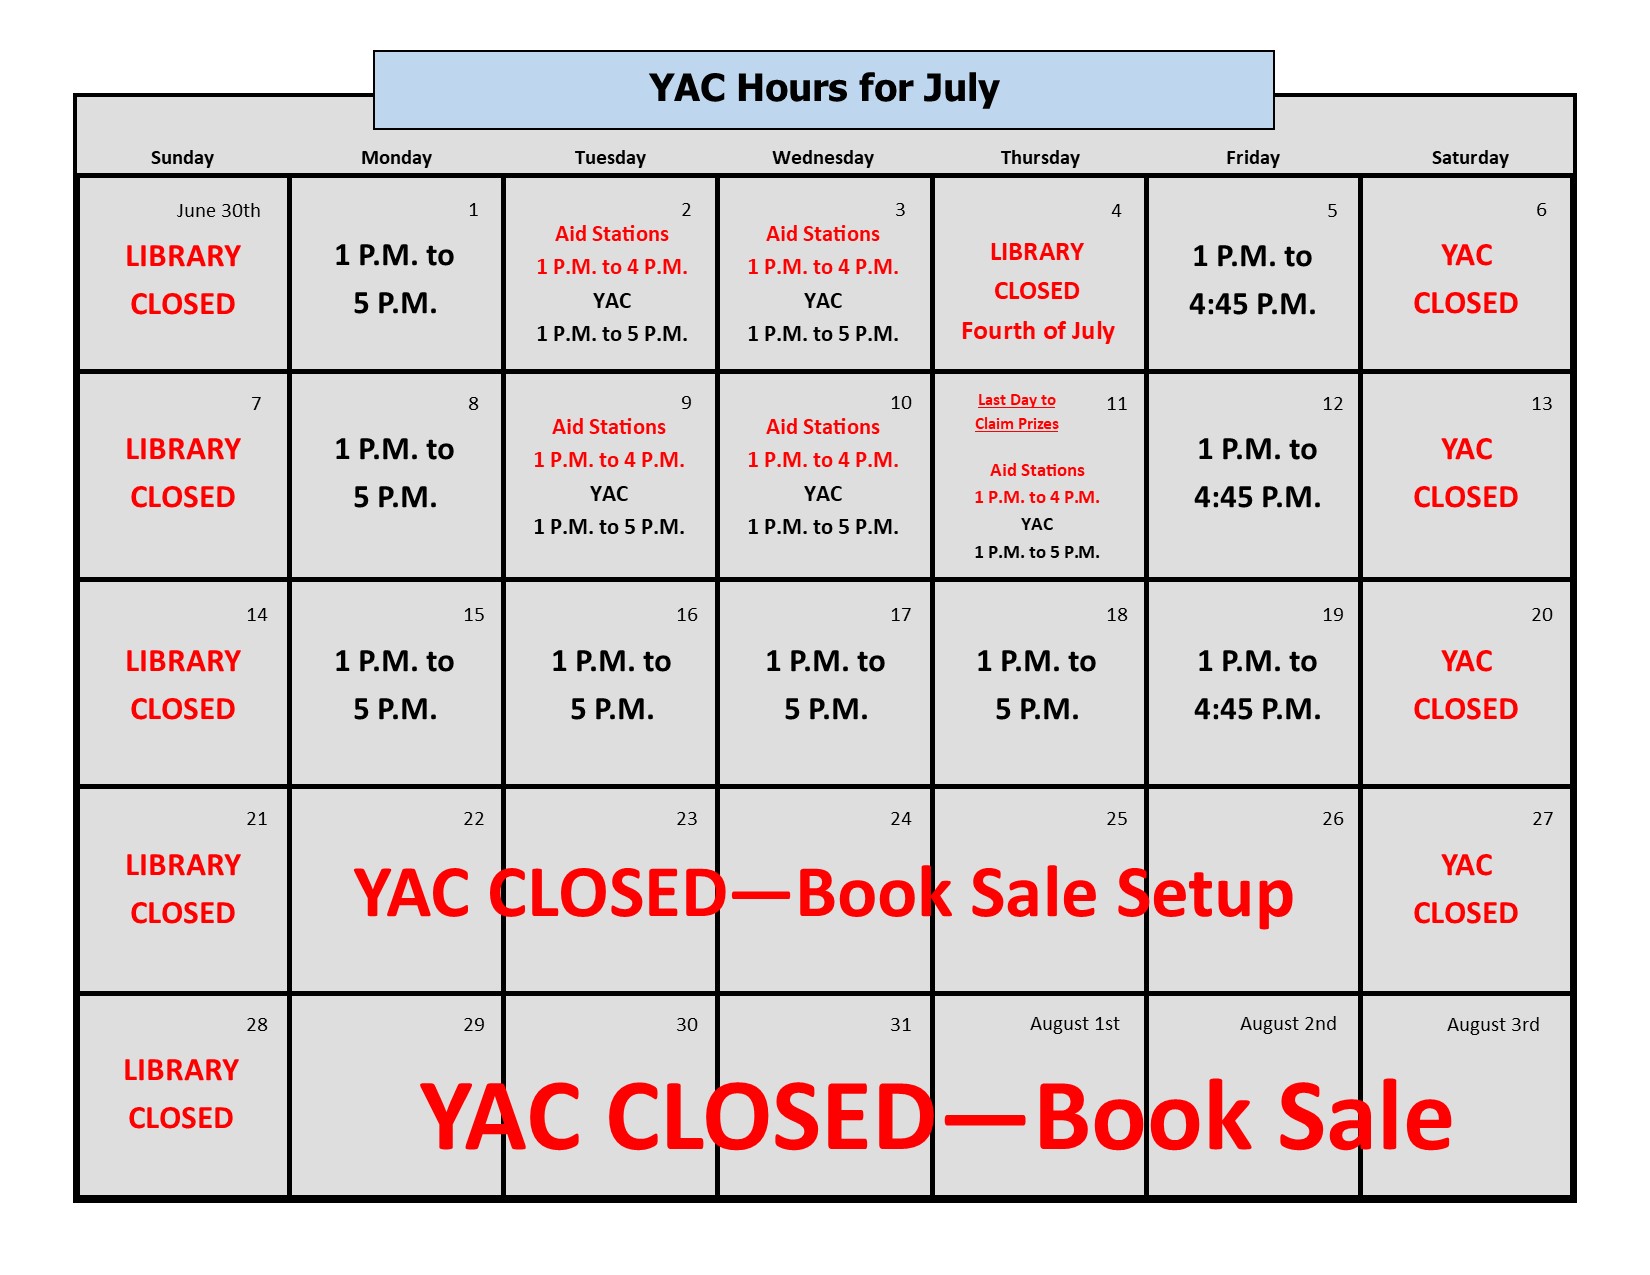 7 - YAC Hours for July